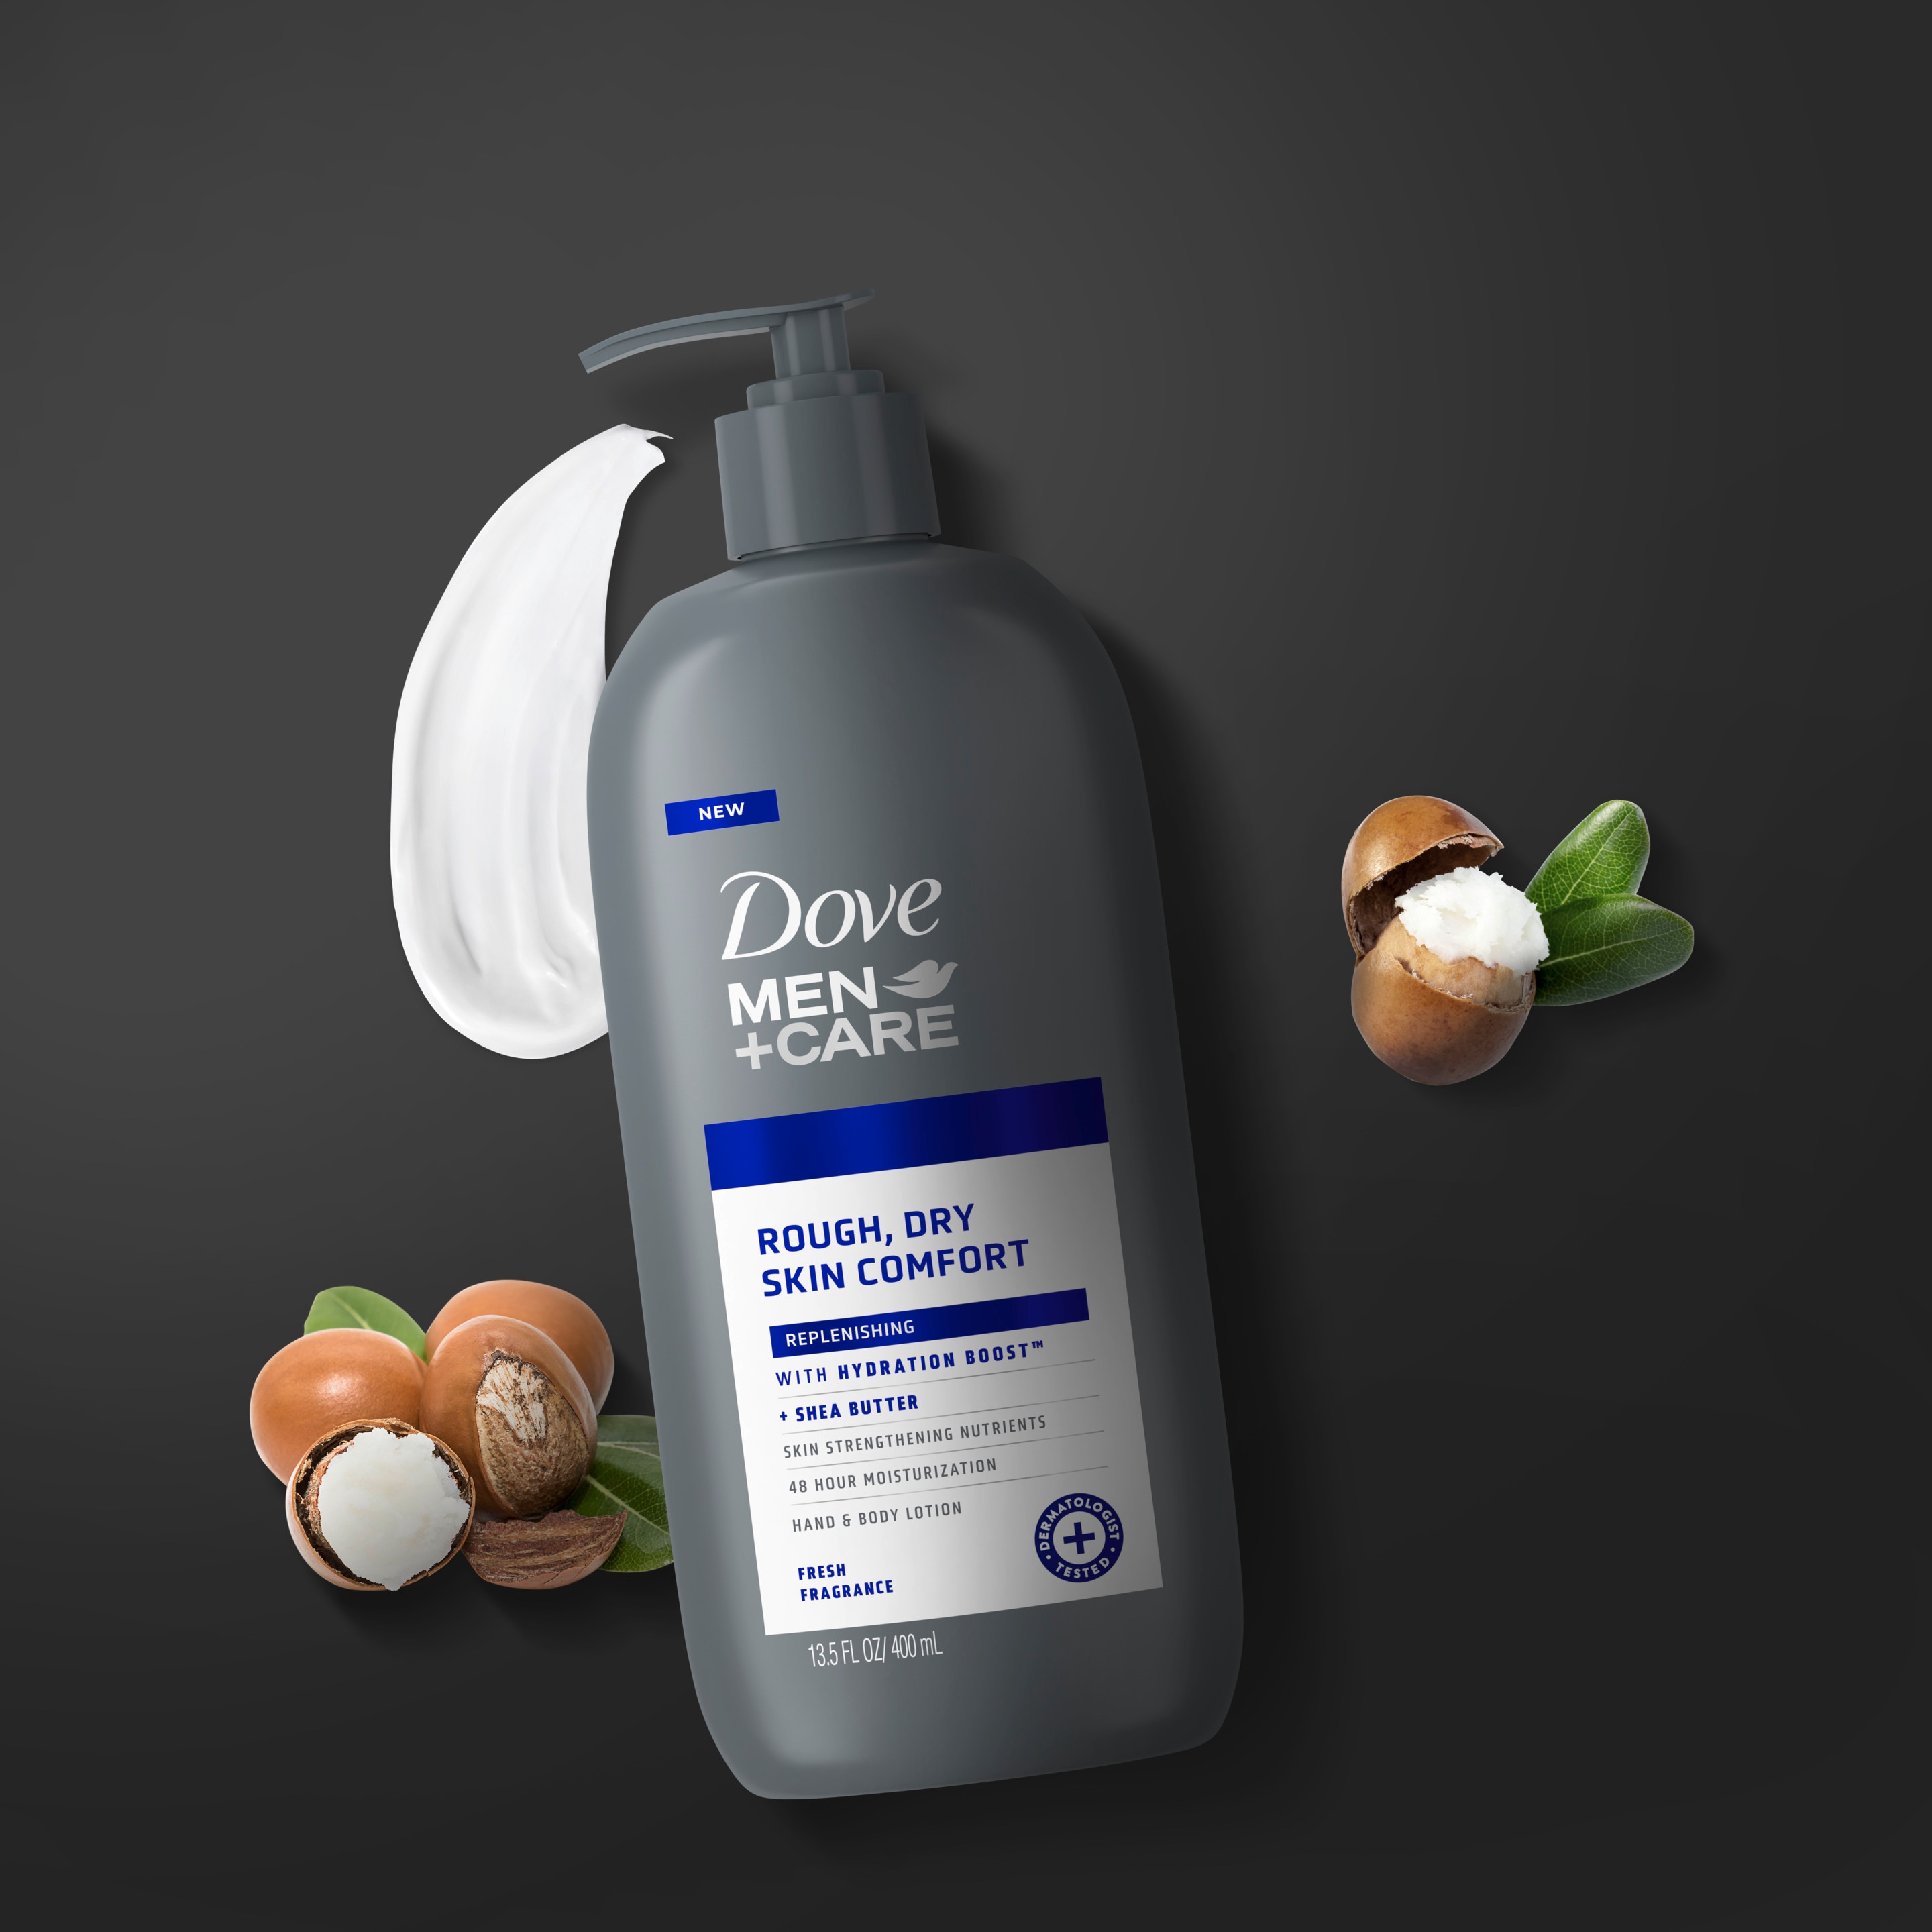 Dove Men+Care Hand and Body Lotion